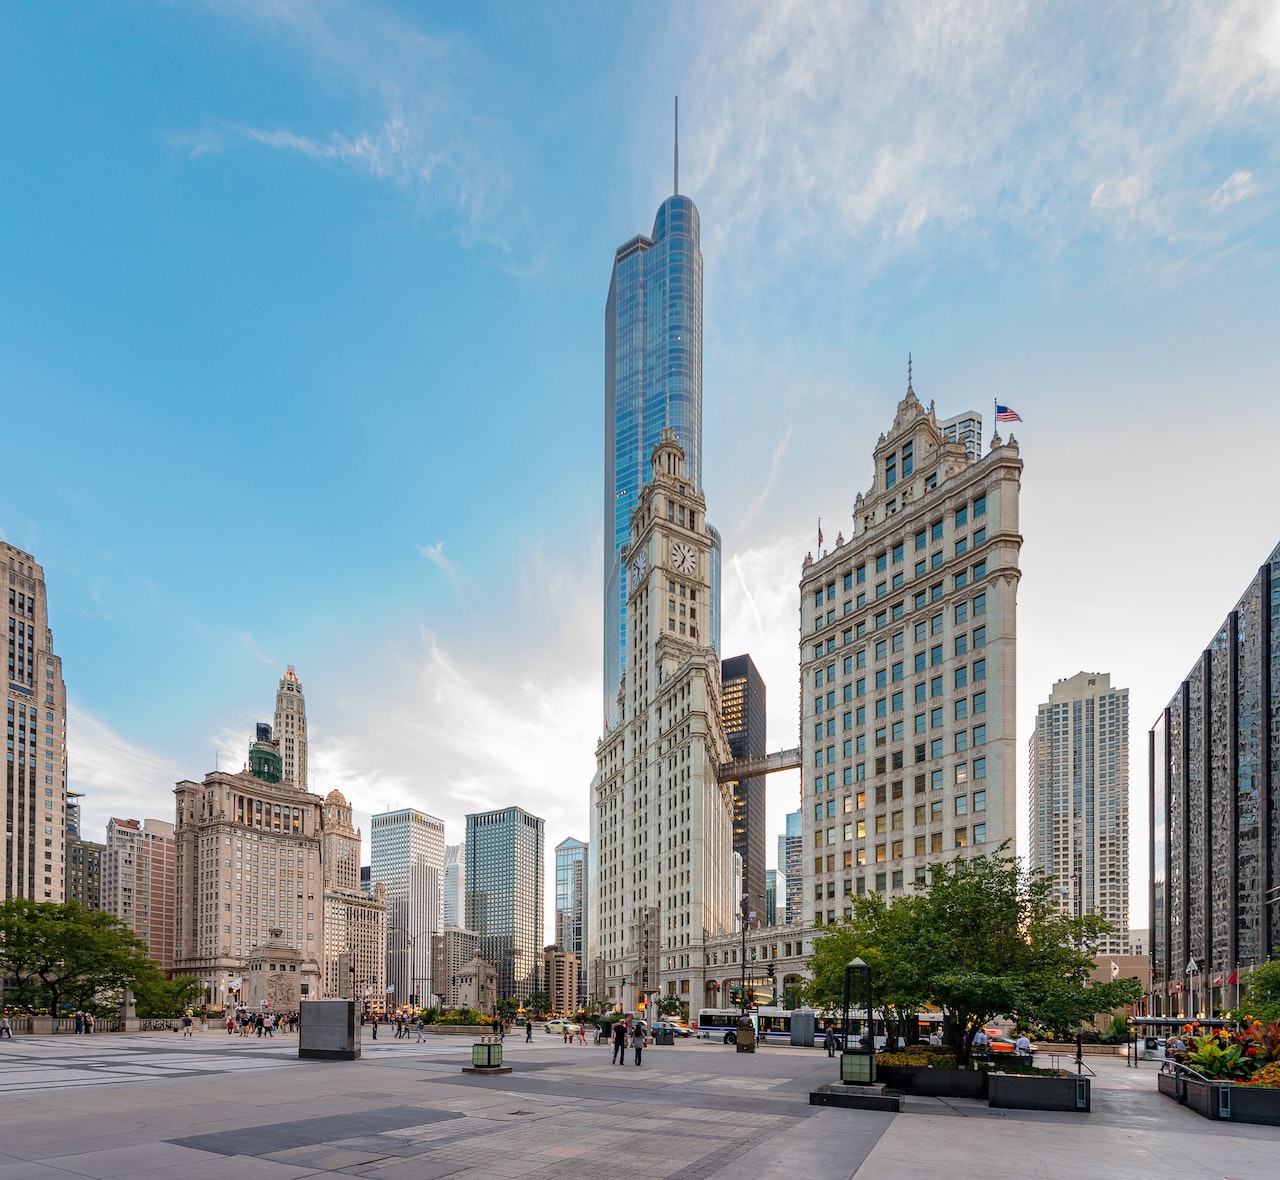 Chicago Commercial Real Estate News 2019 - Cawley Commercial Real Estate Real Estate